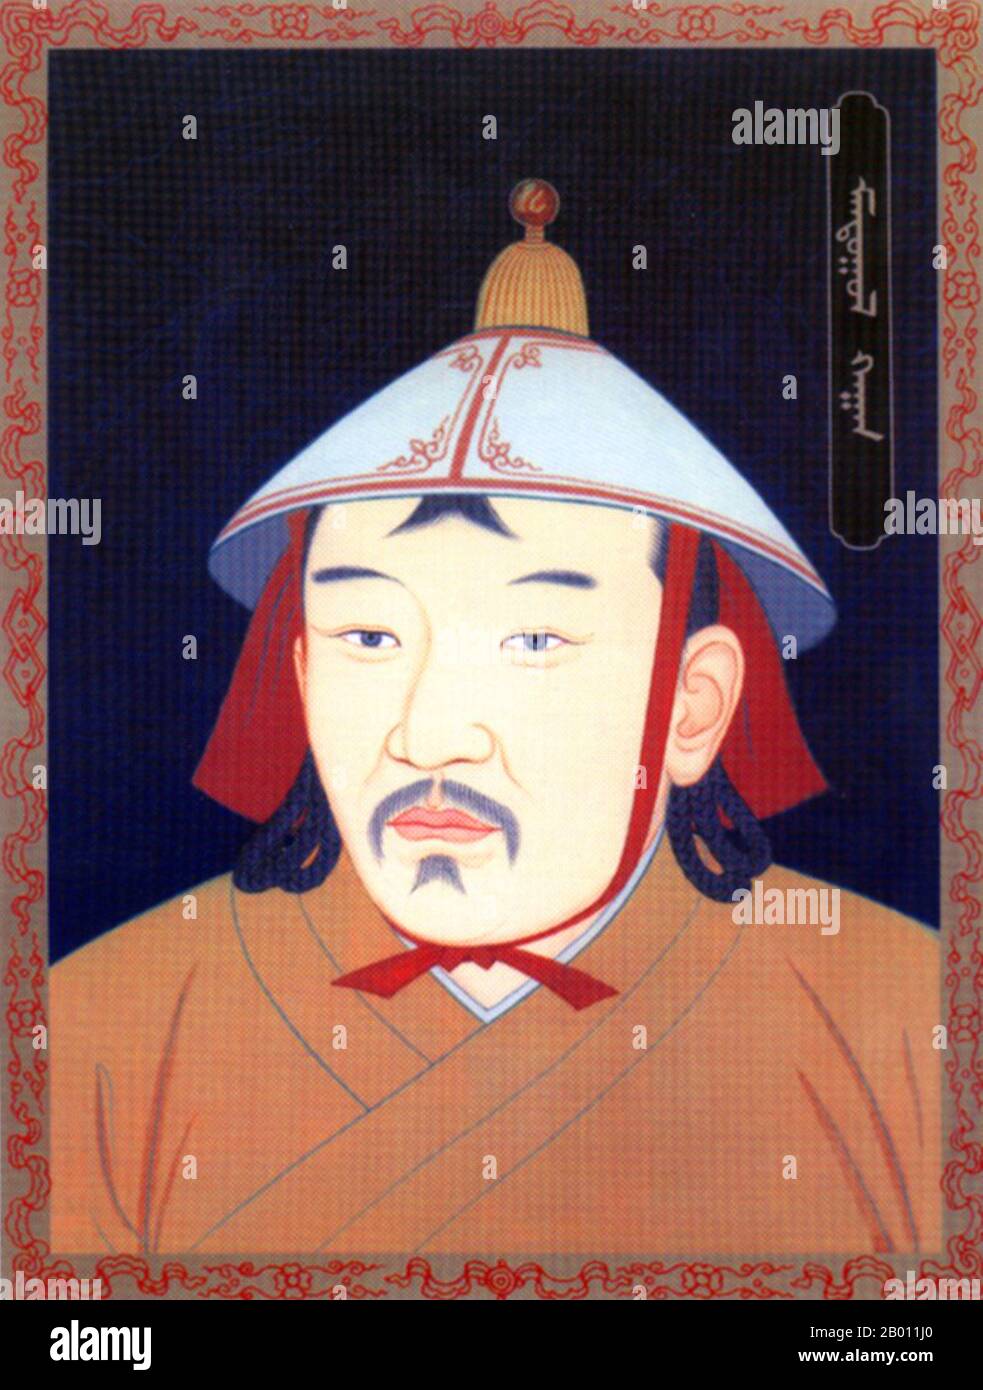 Mongolia: Manduul Khan, Khagan of the Northern Yuan Dynasty (r. 1475-1478), 20th century.  Manduul Khan (Manduuluu, Manduyul or Manduyulun) (1438–1478), was a Mongol khan of the Northern Yuan Dynasty in Mongolia, the younger half-brother of Tayisung Khan Toghtoa Bukha. He became khagan in 1475 after the position had been vacant for nearly a decade as the clans fought each other for dominance. His reign was short, but it led to a strengthening of the the khagan's power and a reduction in the influence of the Mongol nobles, paving the way for his successor and adopted son Dayan Khan. Stock Photo